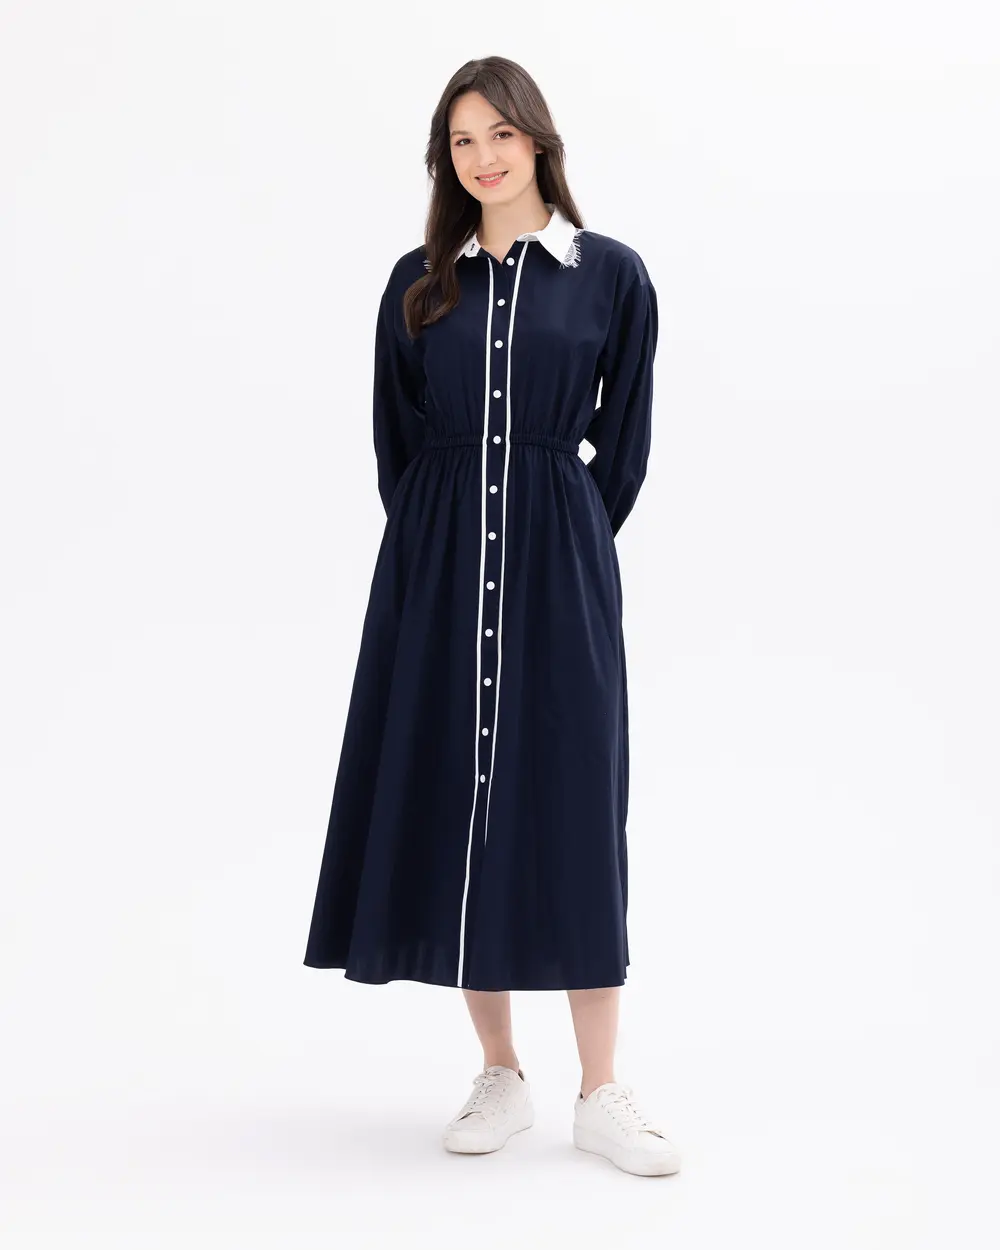 Shirred Button Detailed Dress